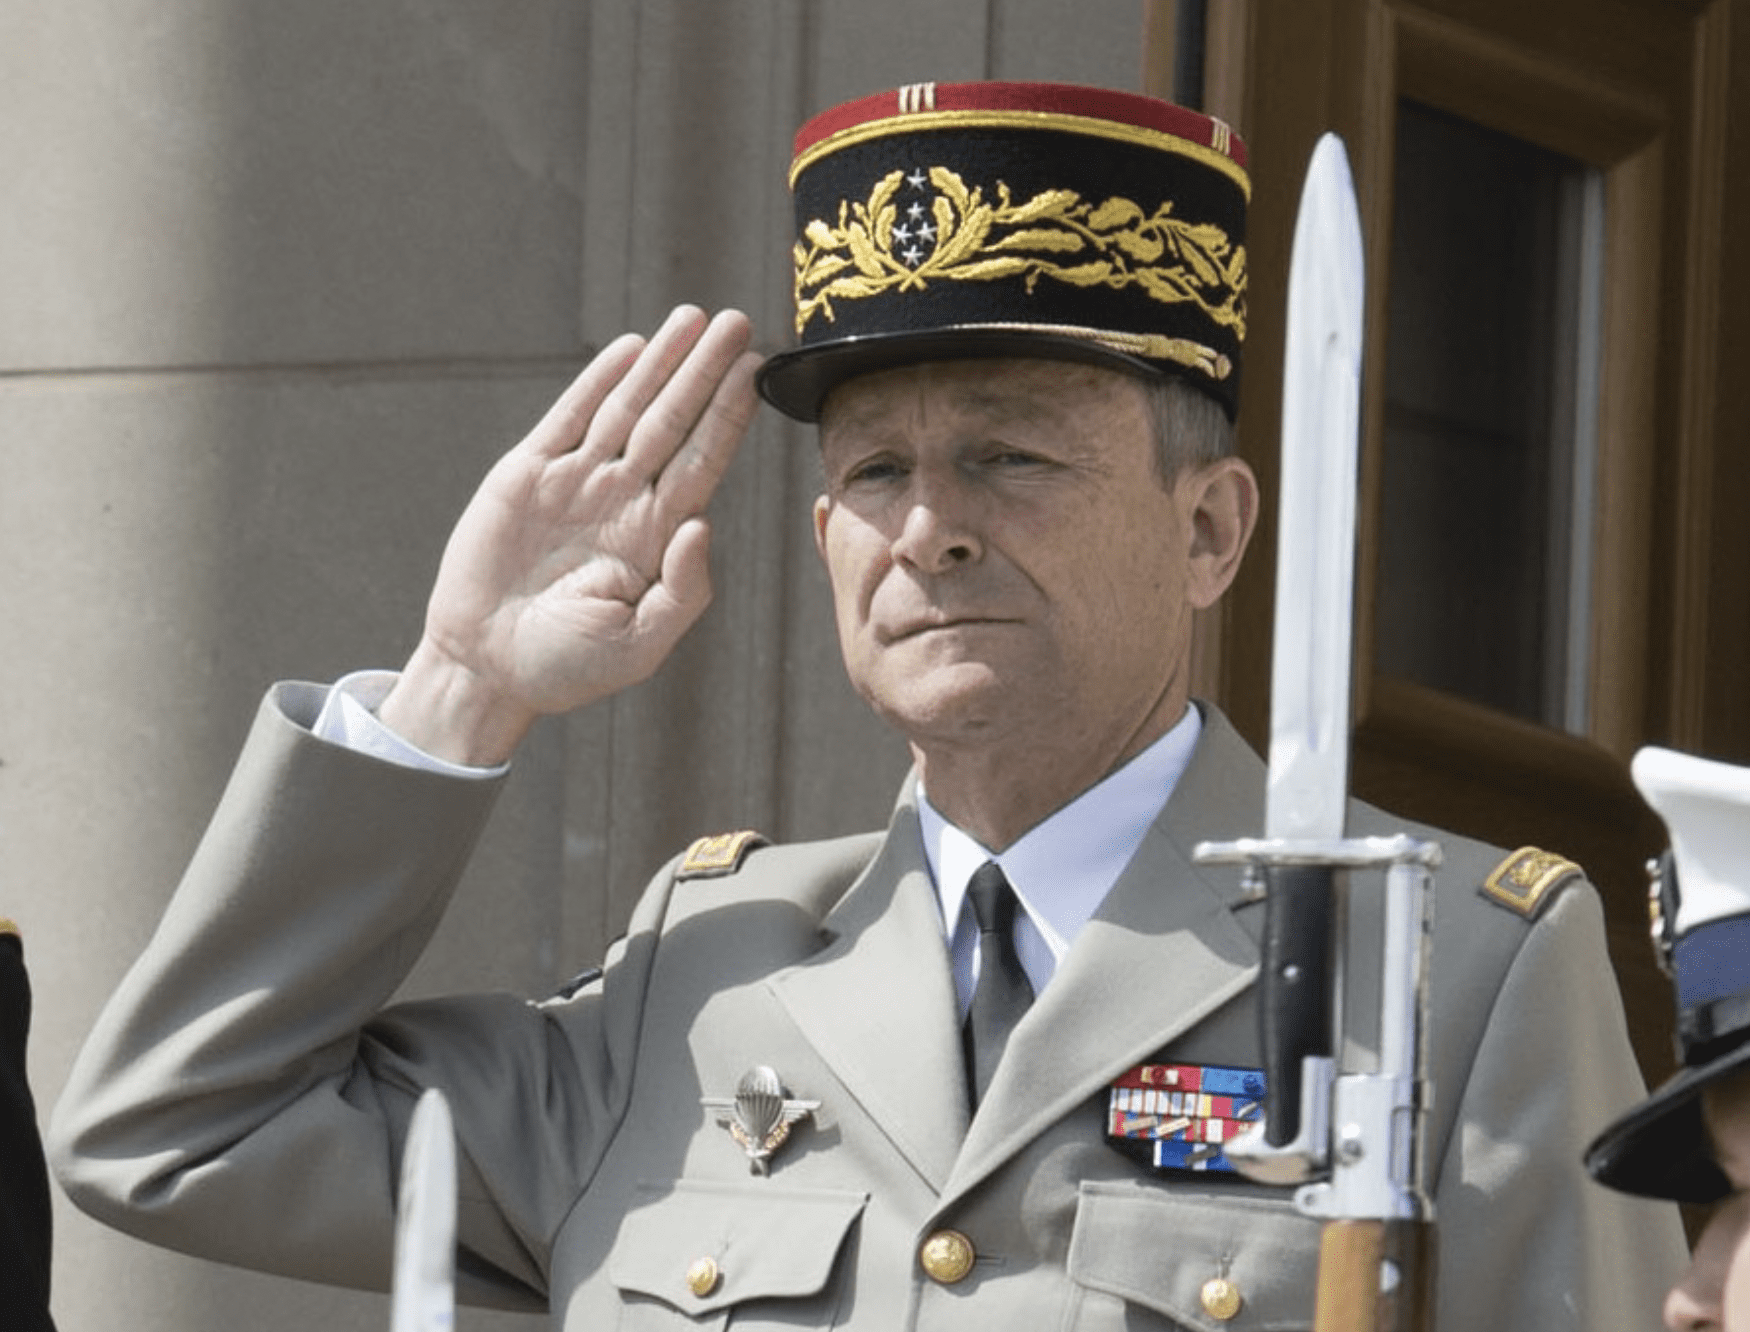 French General: The Ukraine War Is Not in the Interest of European